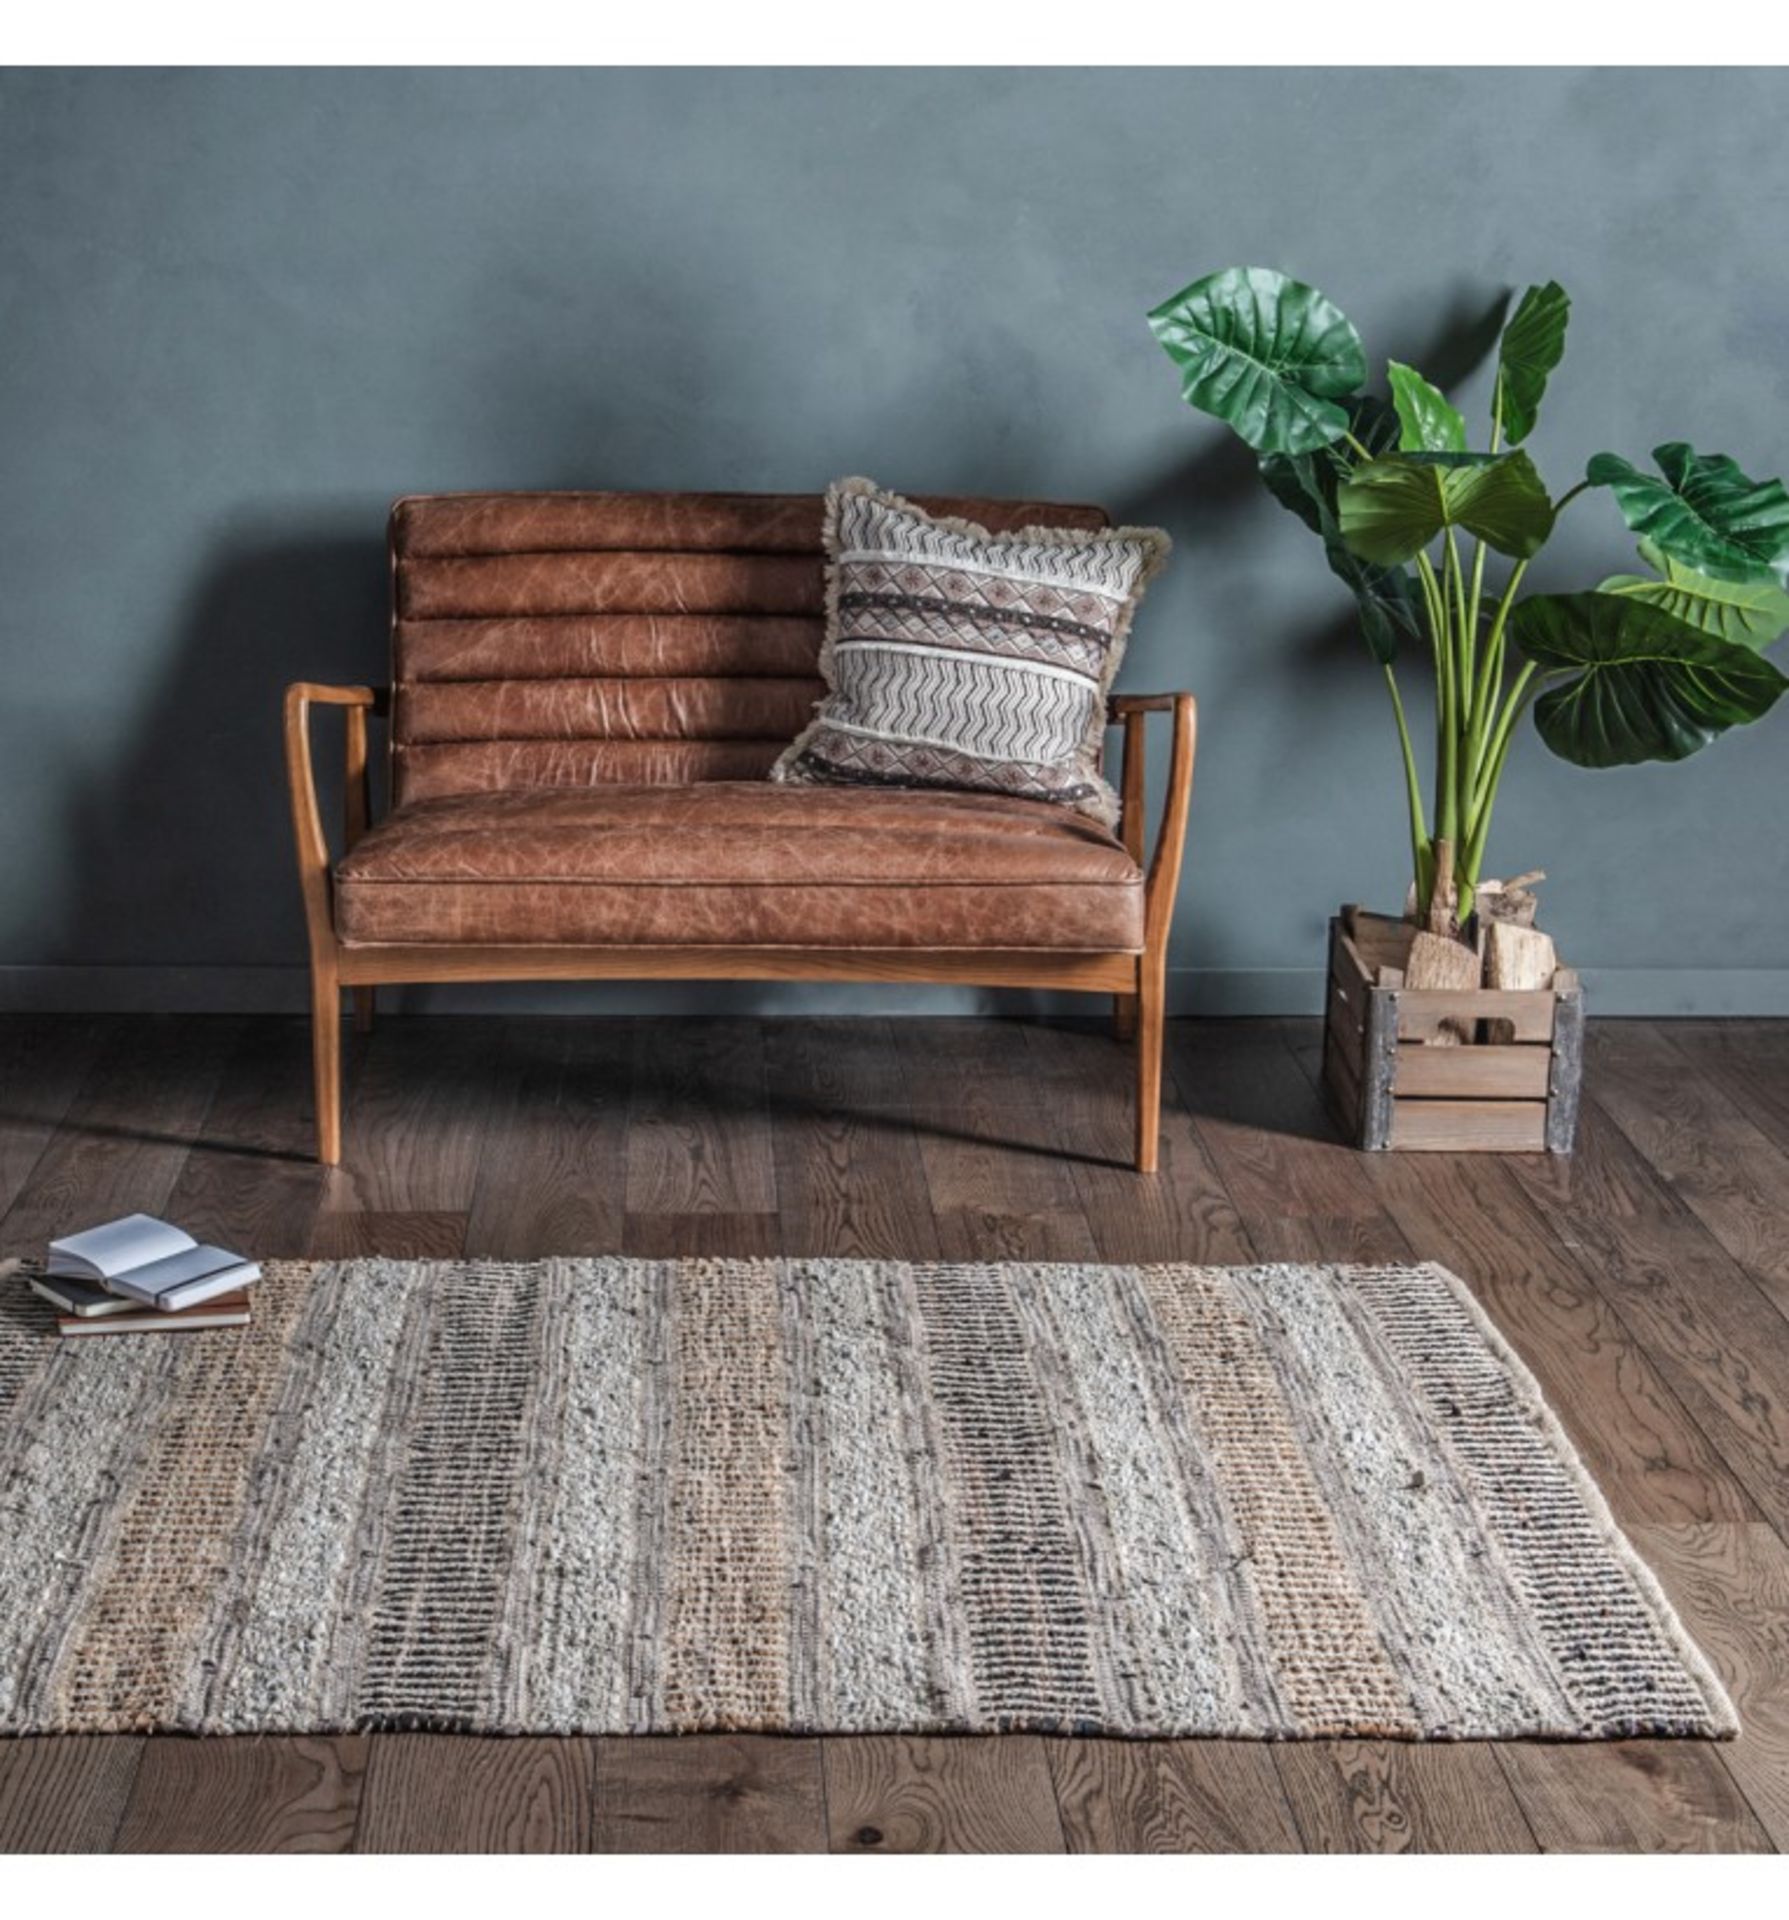 Rojas Leather Rug Chocolate Add some texture to your interior with this striped handloomed leather